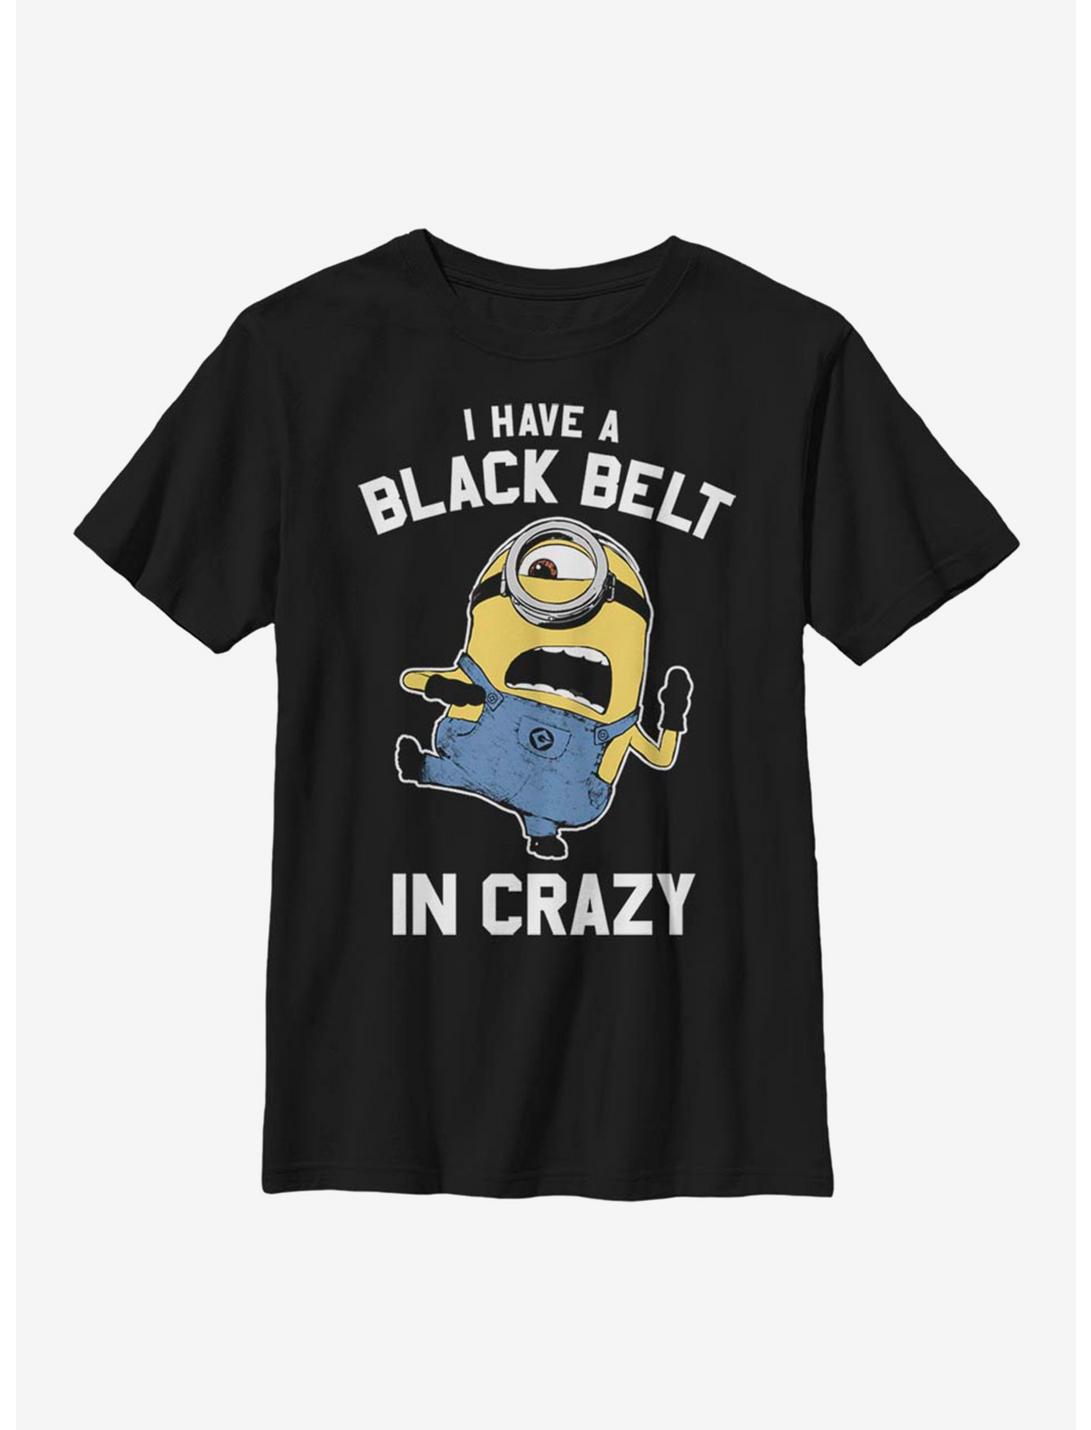 Despicable Me Minions Black Belt in Crazy Youth T-Shirt, BLACK, hi-res